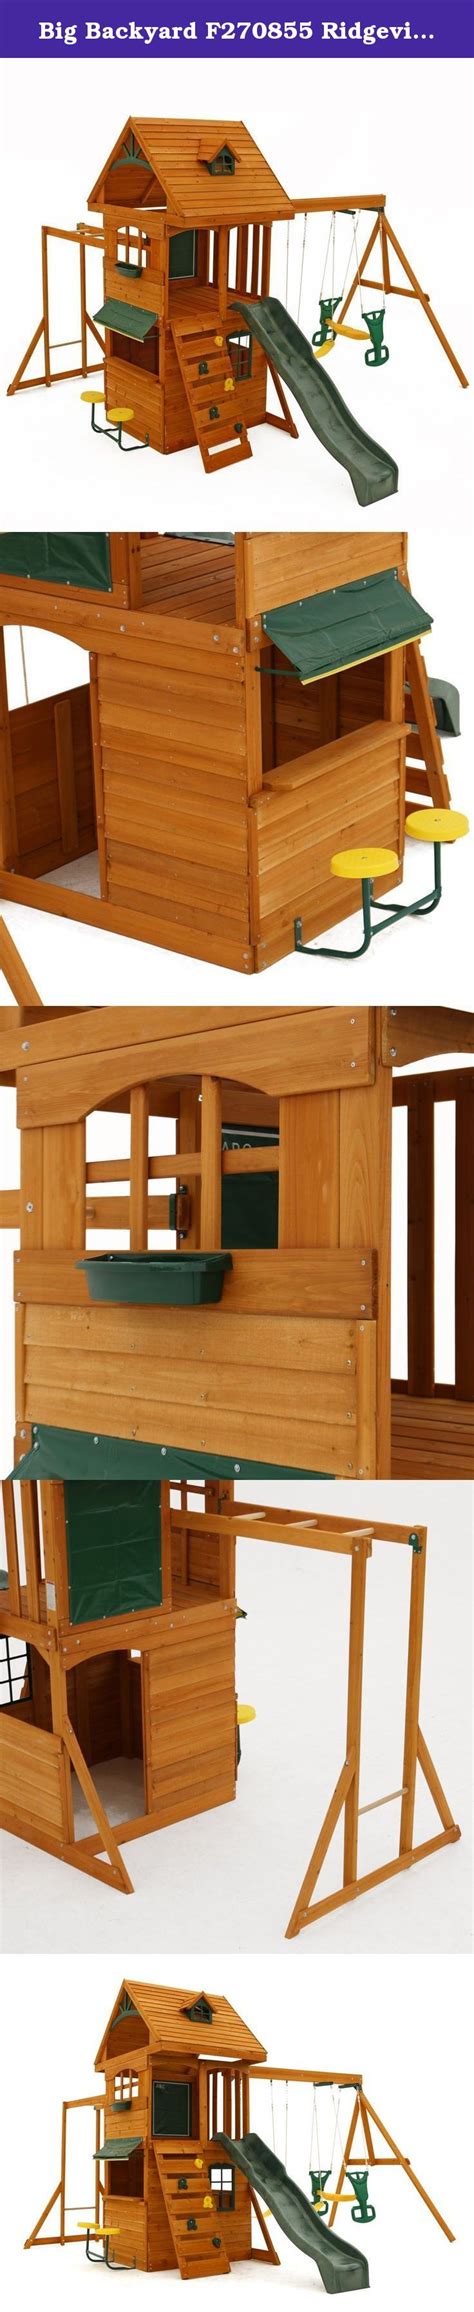 Shop for kidkraft ridgeview deluxe clubhouse wooden play set. Big Backyard F270855 Ridgeview Clubhouse Deluxe Play Set ...